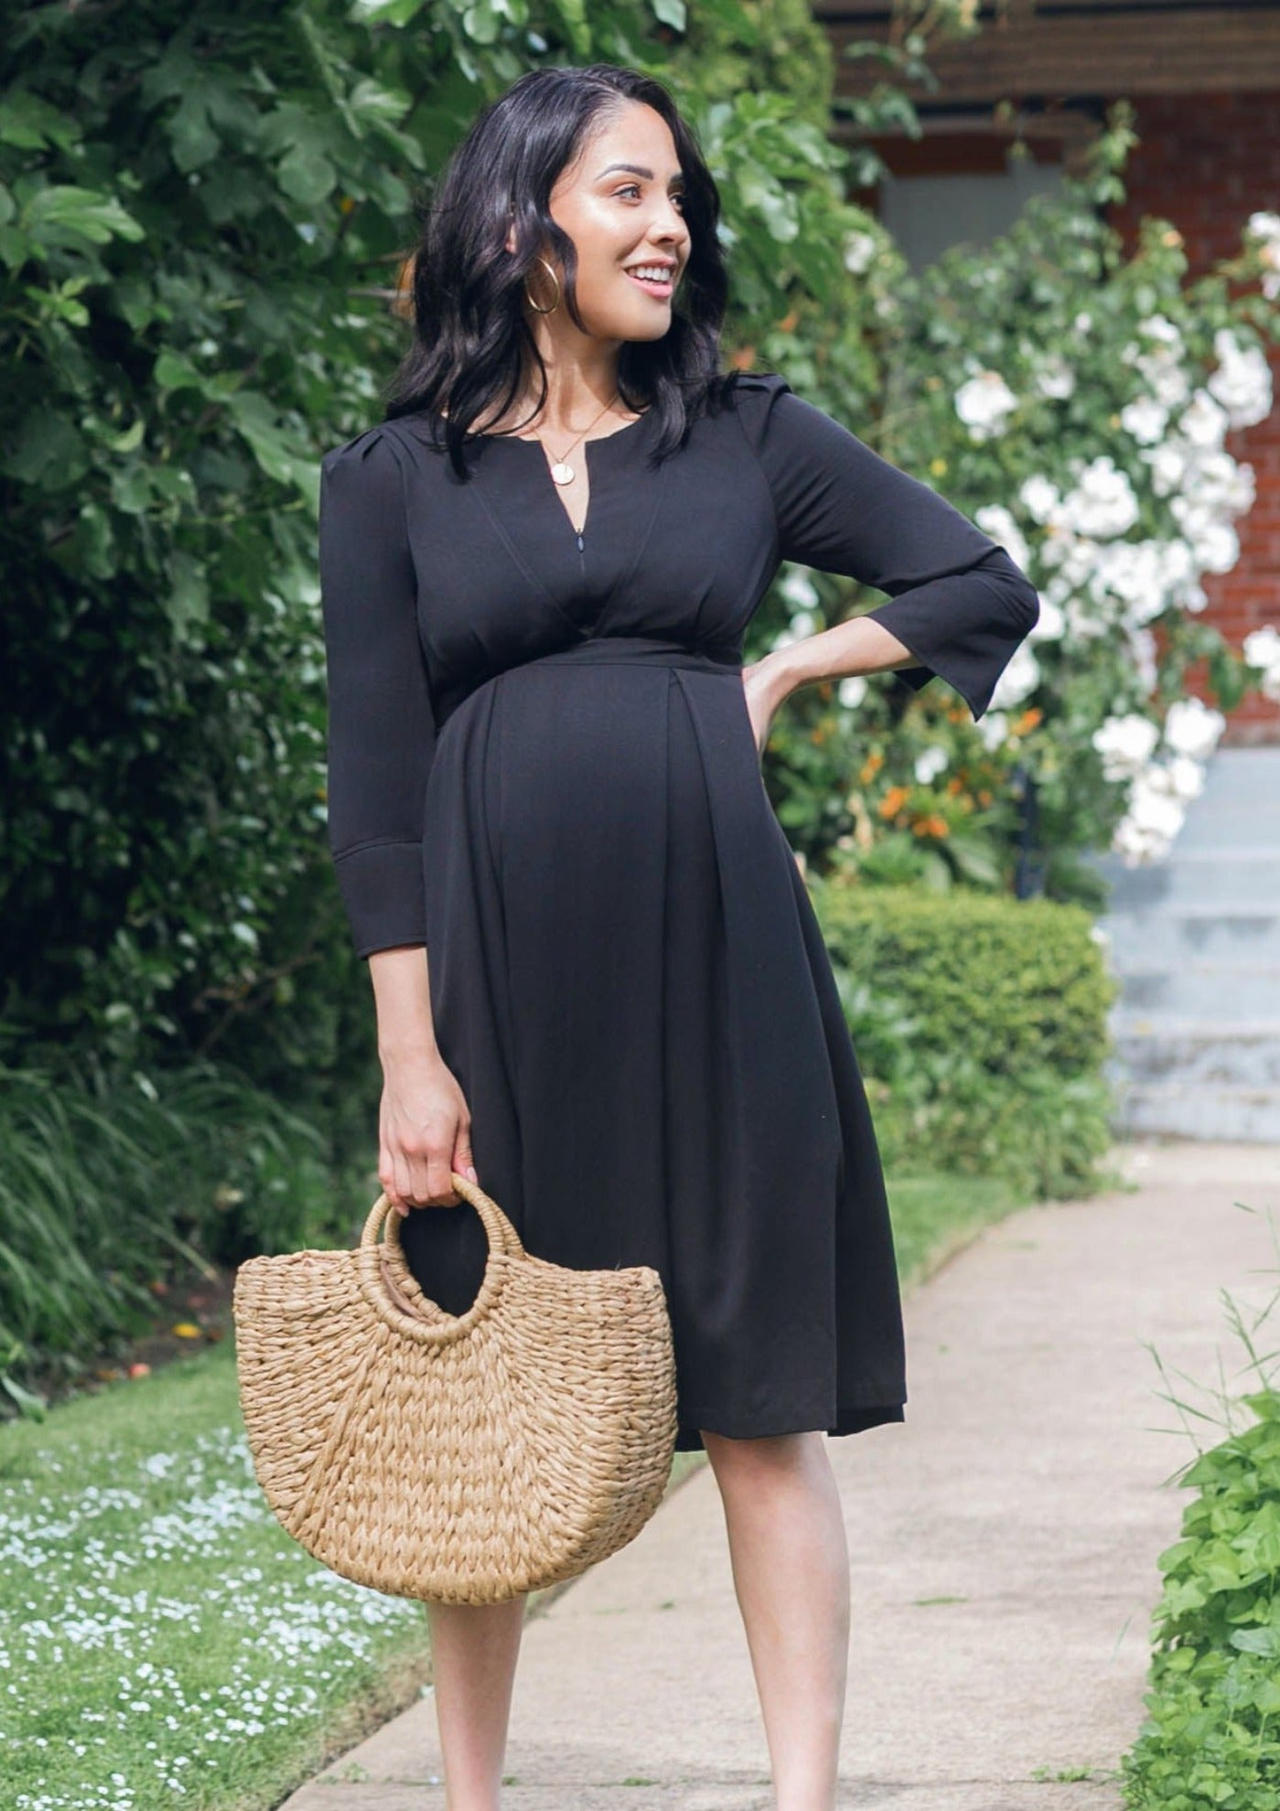 Shop the Best Petite Maternity Clothes for Petite by